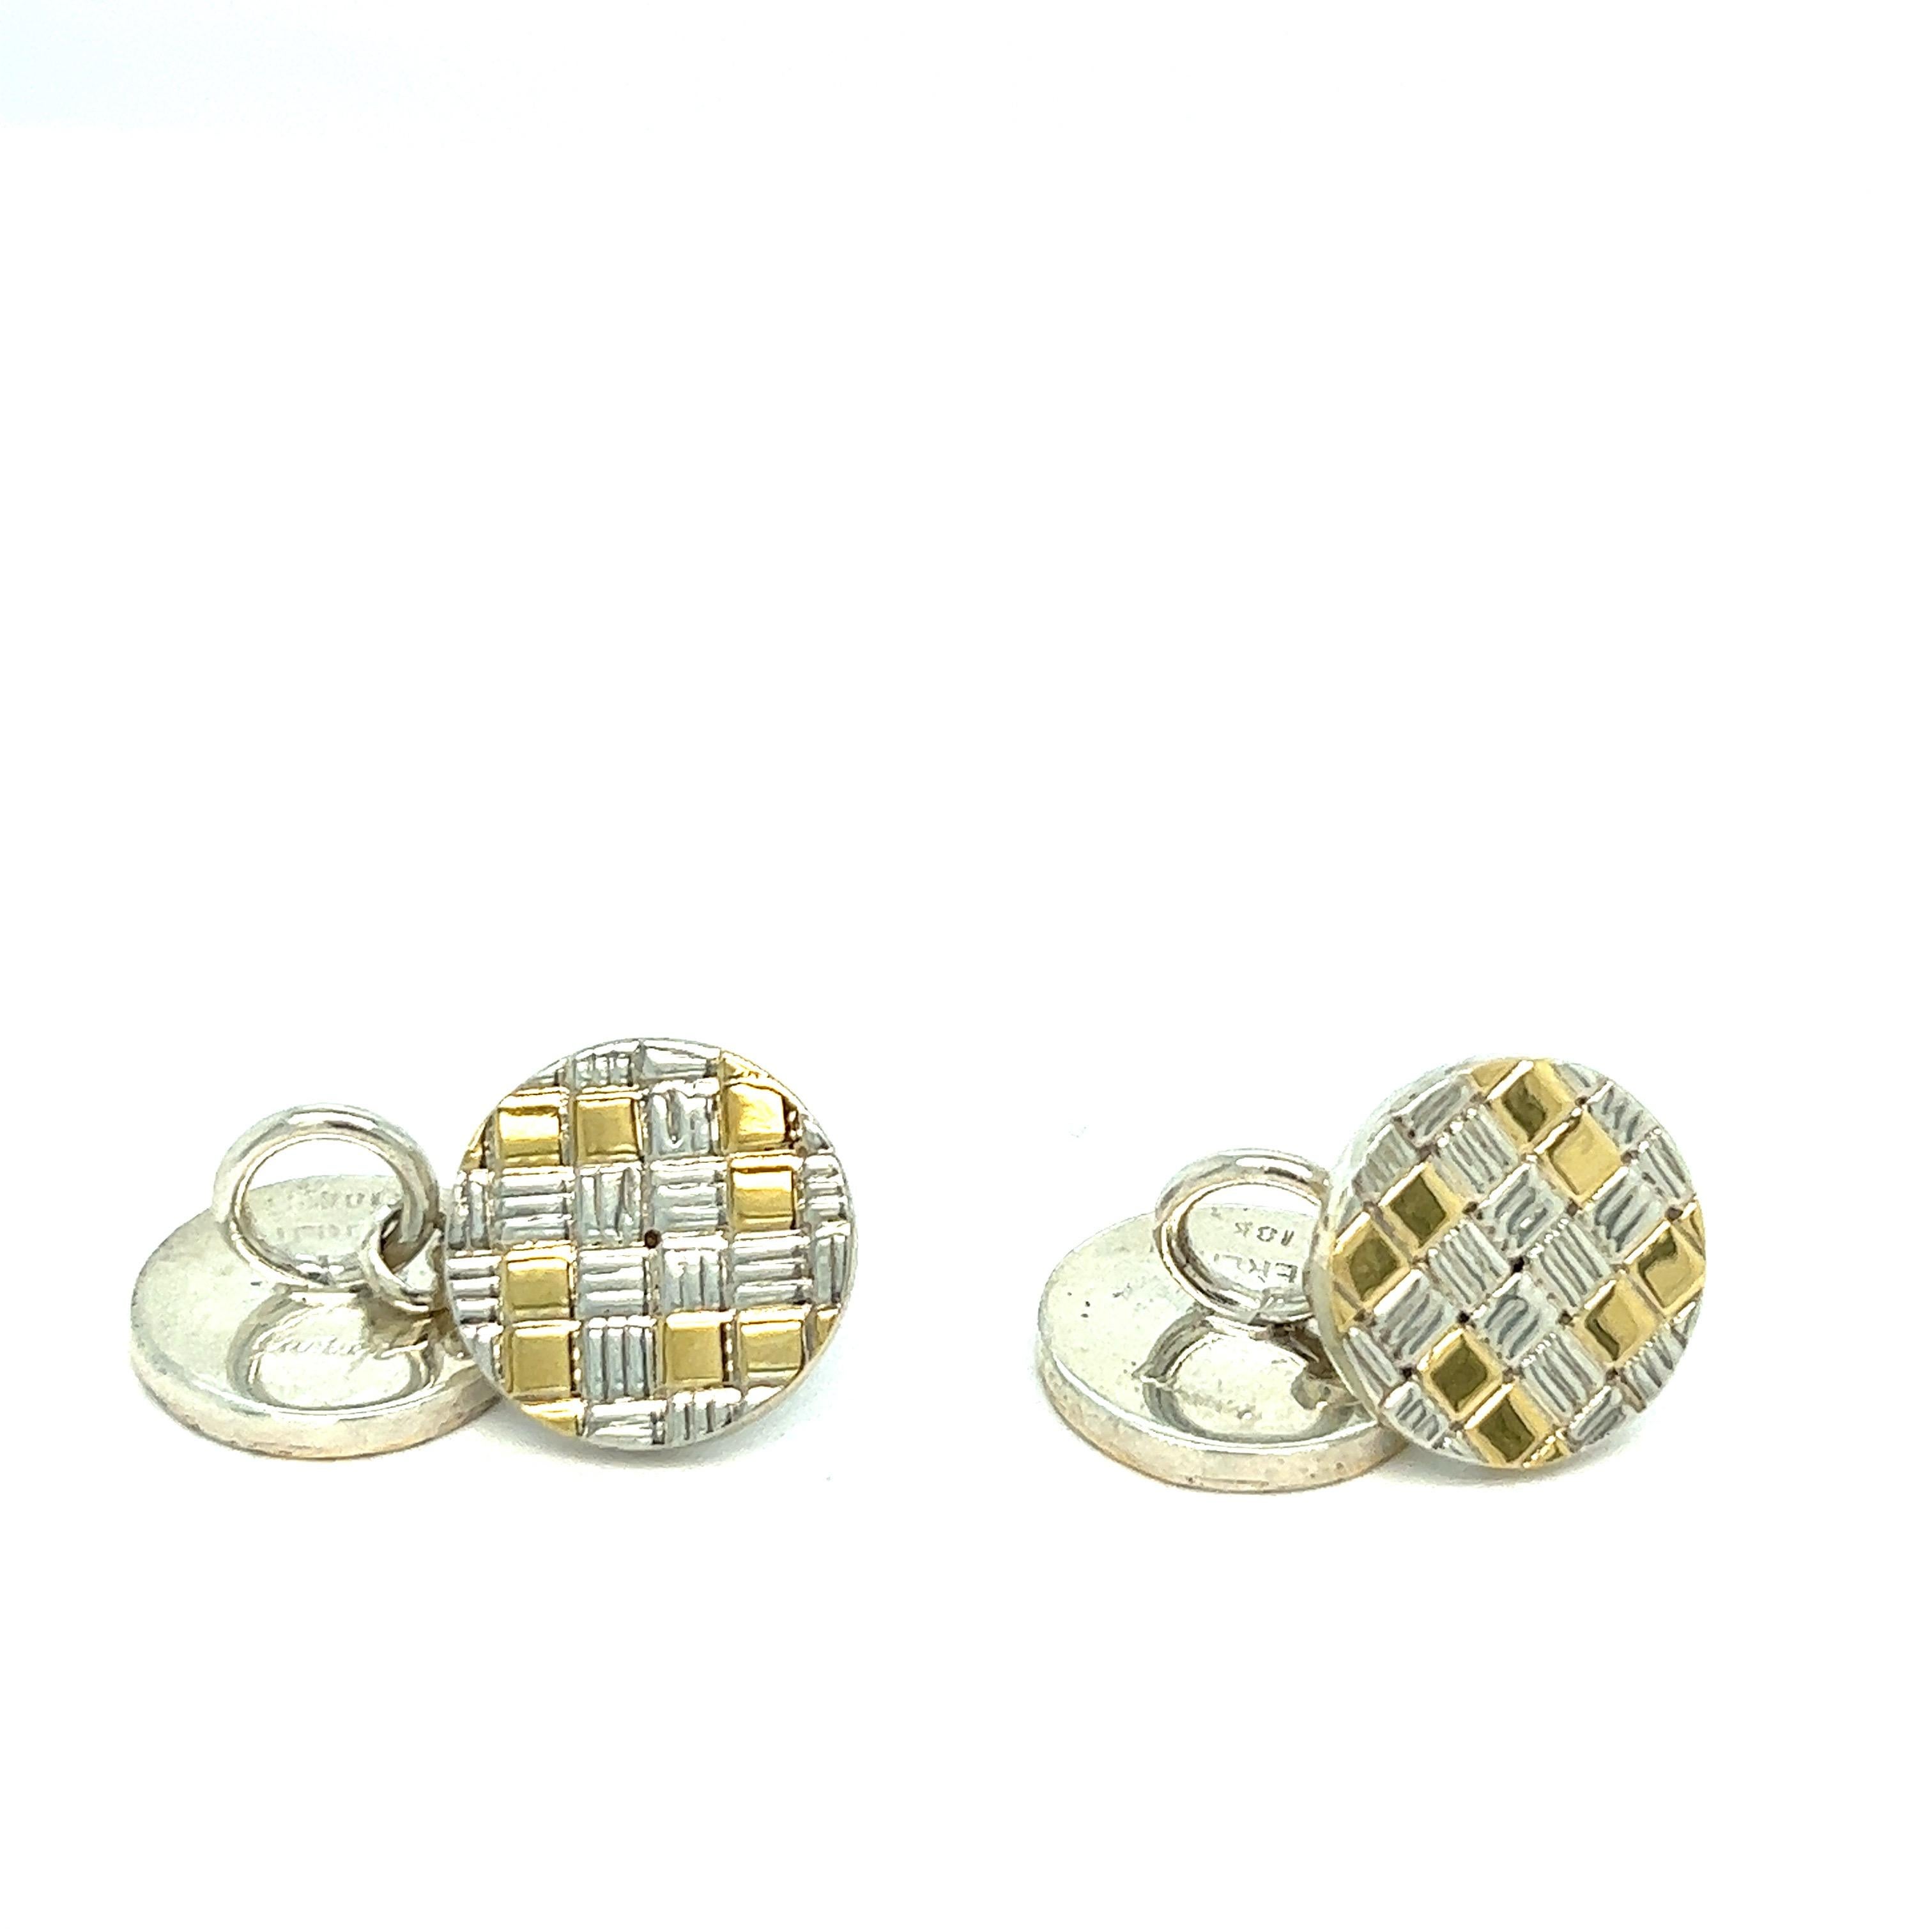 Pair of 18k gold and sterling silver small cufflinks by Cartier. Each top is 14 mm in diameter. Marked: Cartier, Sterling, 18k. Weight - 13.2 grams.